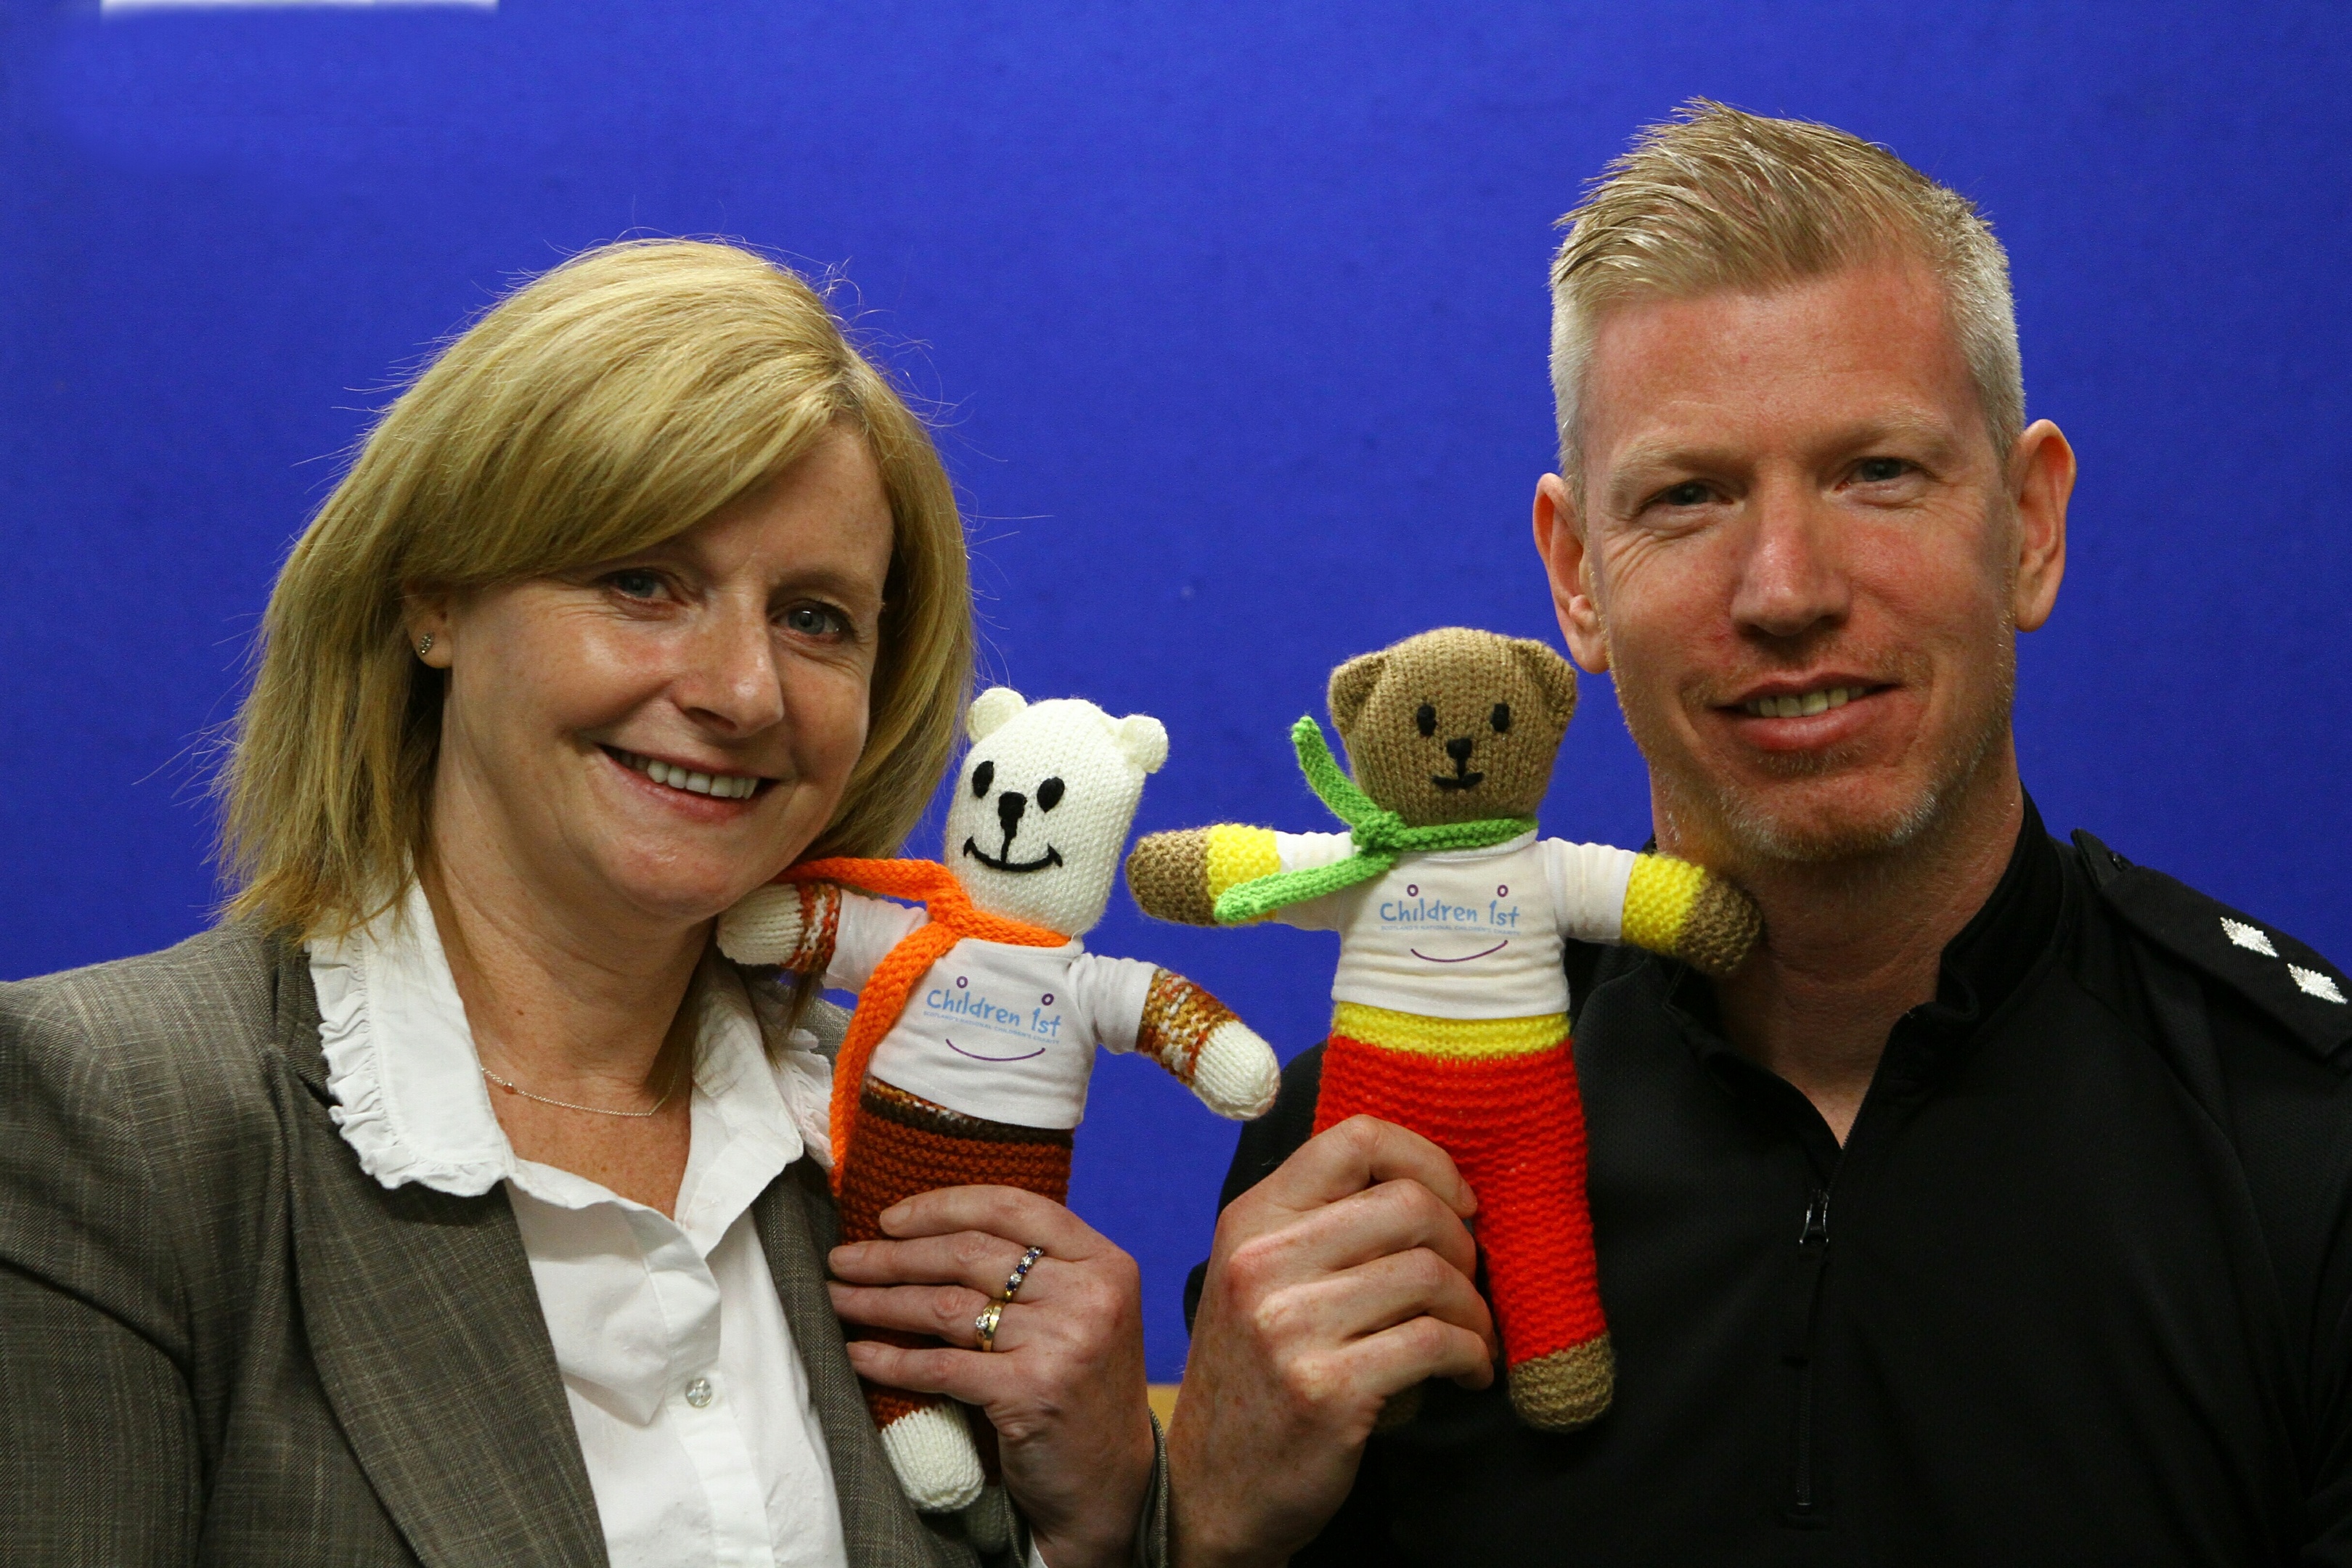 Linda Jardine of Children 1st and Insp Chris Boath at the launch of the Trauma Teddies.